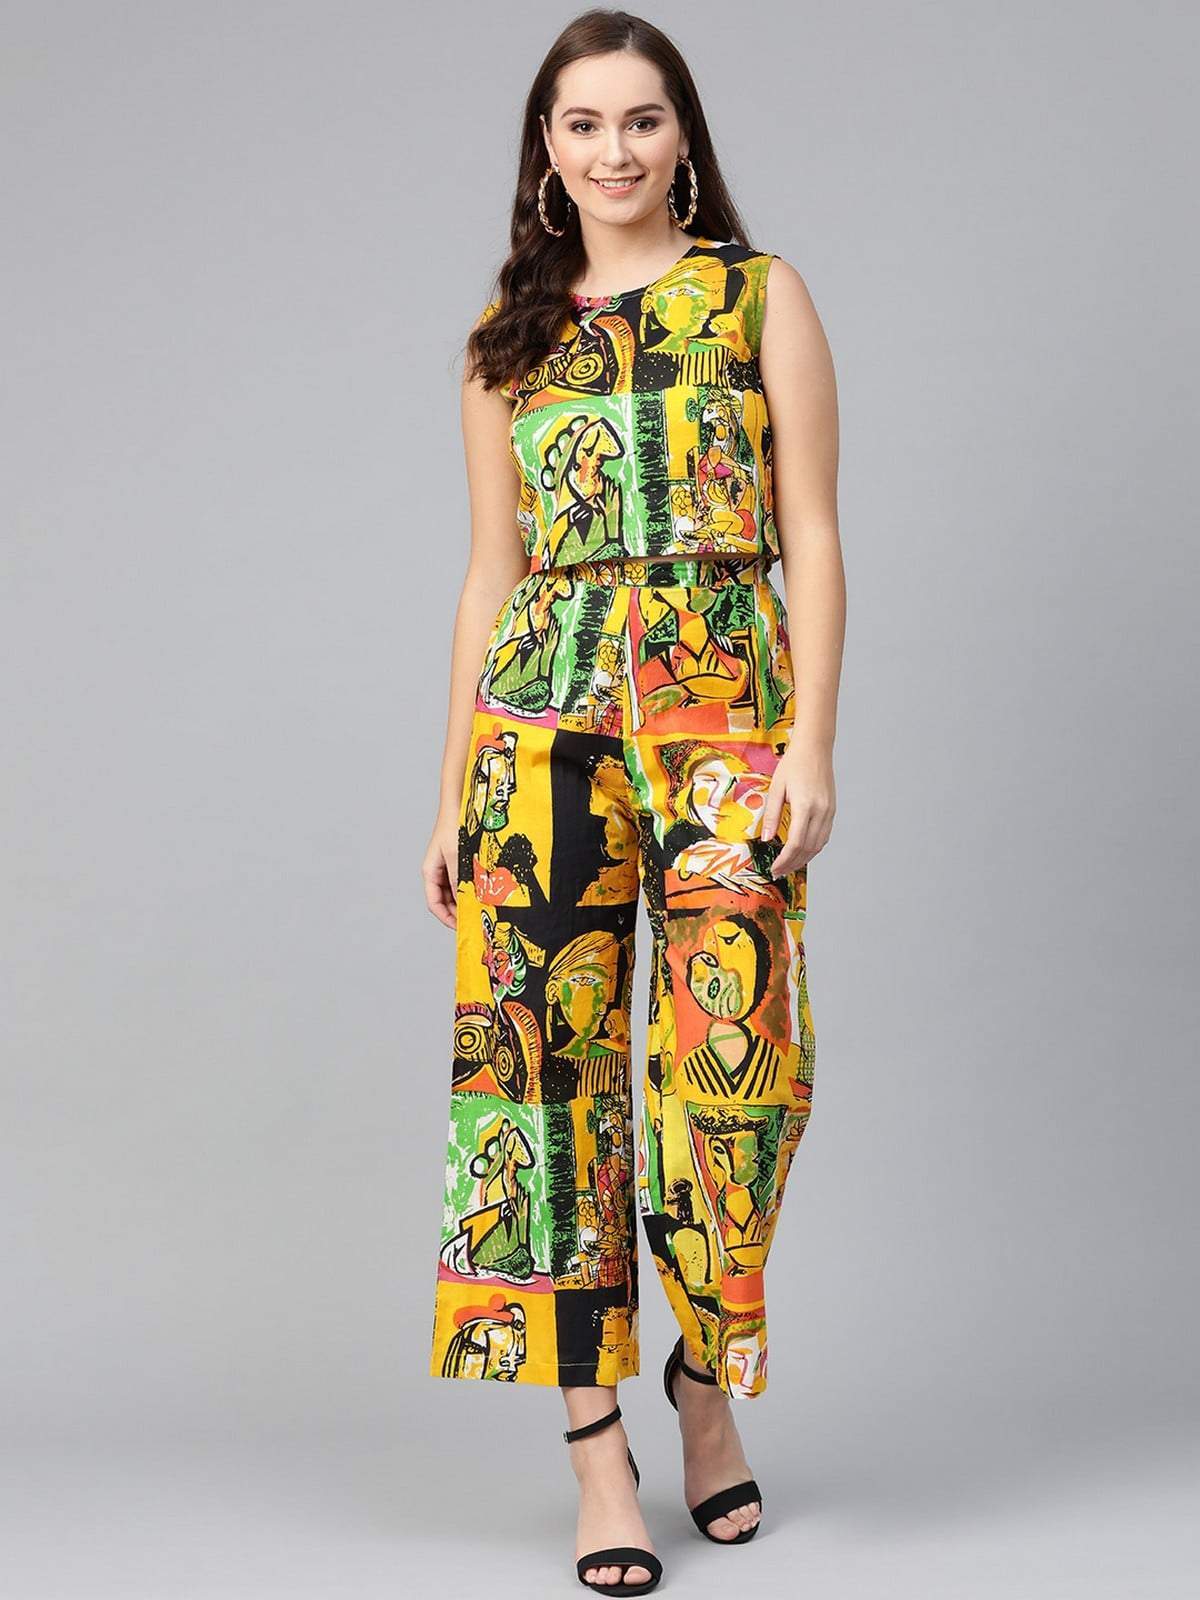 Women's Embroidered Jacket With Printed Top And Pants - Pannkh